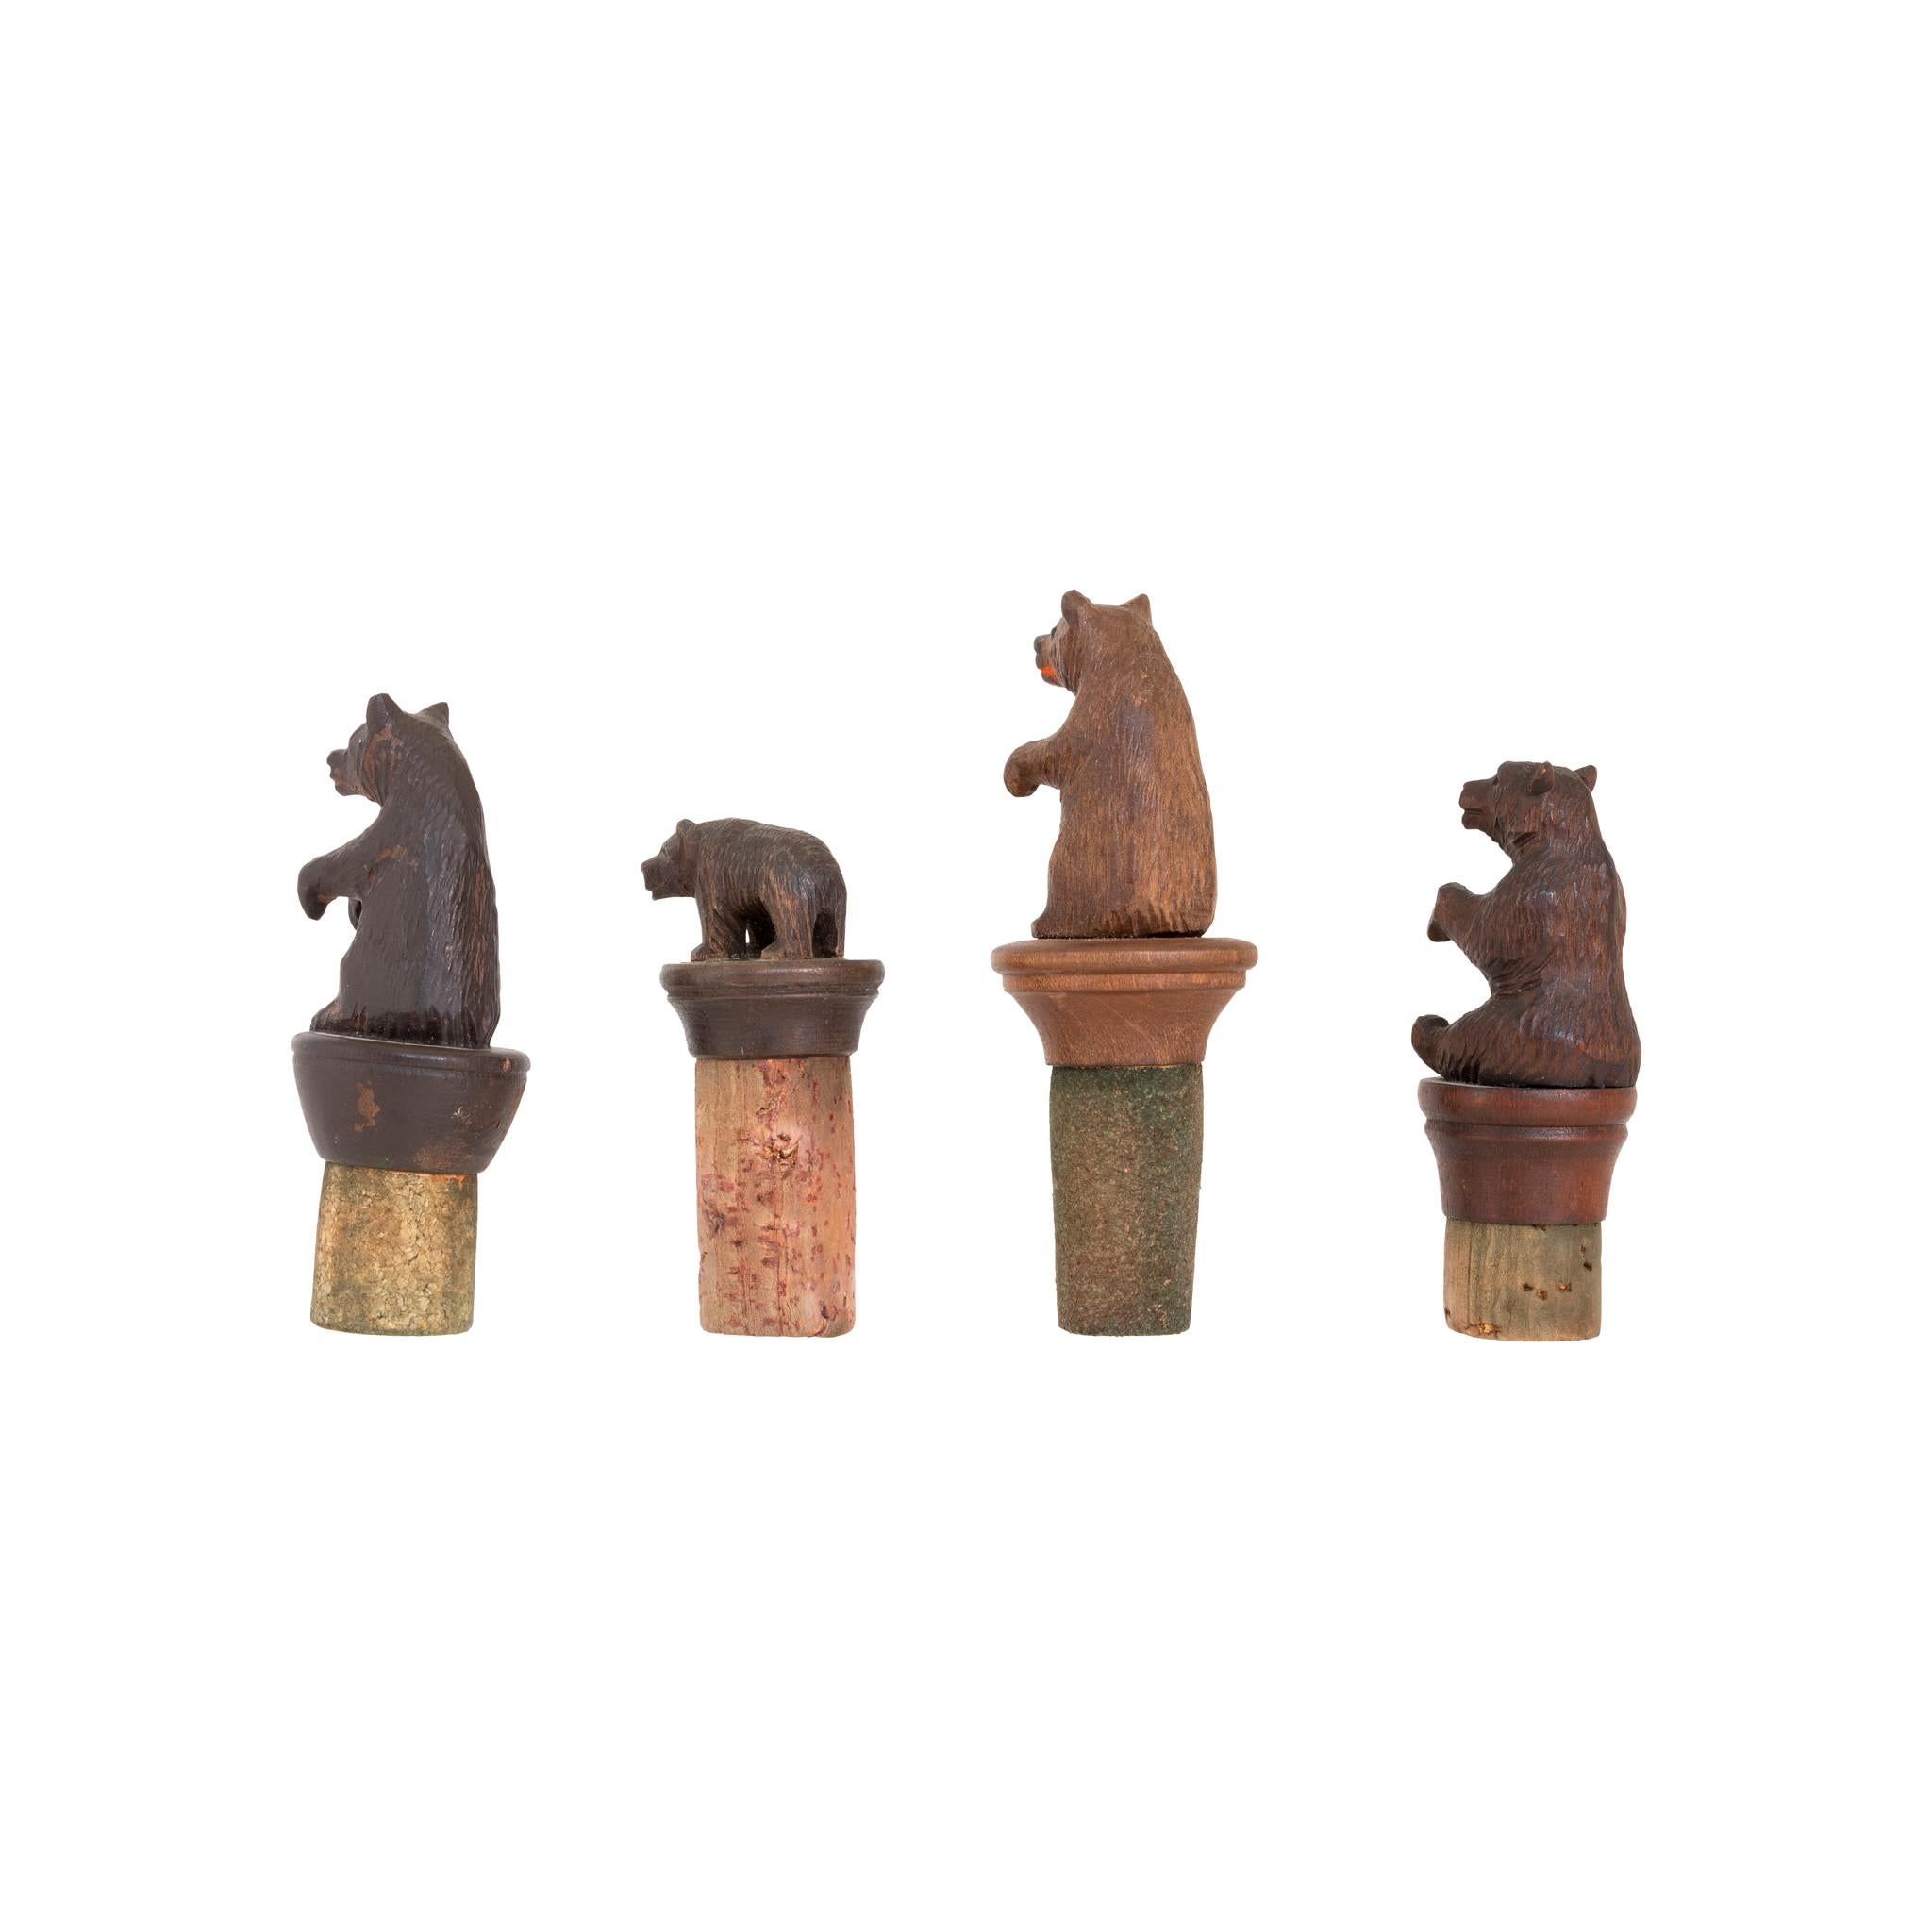 Collection of four miniature carved Swiss bears mounted on corks for wine bottle stoppers. All different.

PERIOD: Circa 1900
ORIGIN: Switzerland
SIZE: Longest 2 1/2